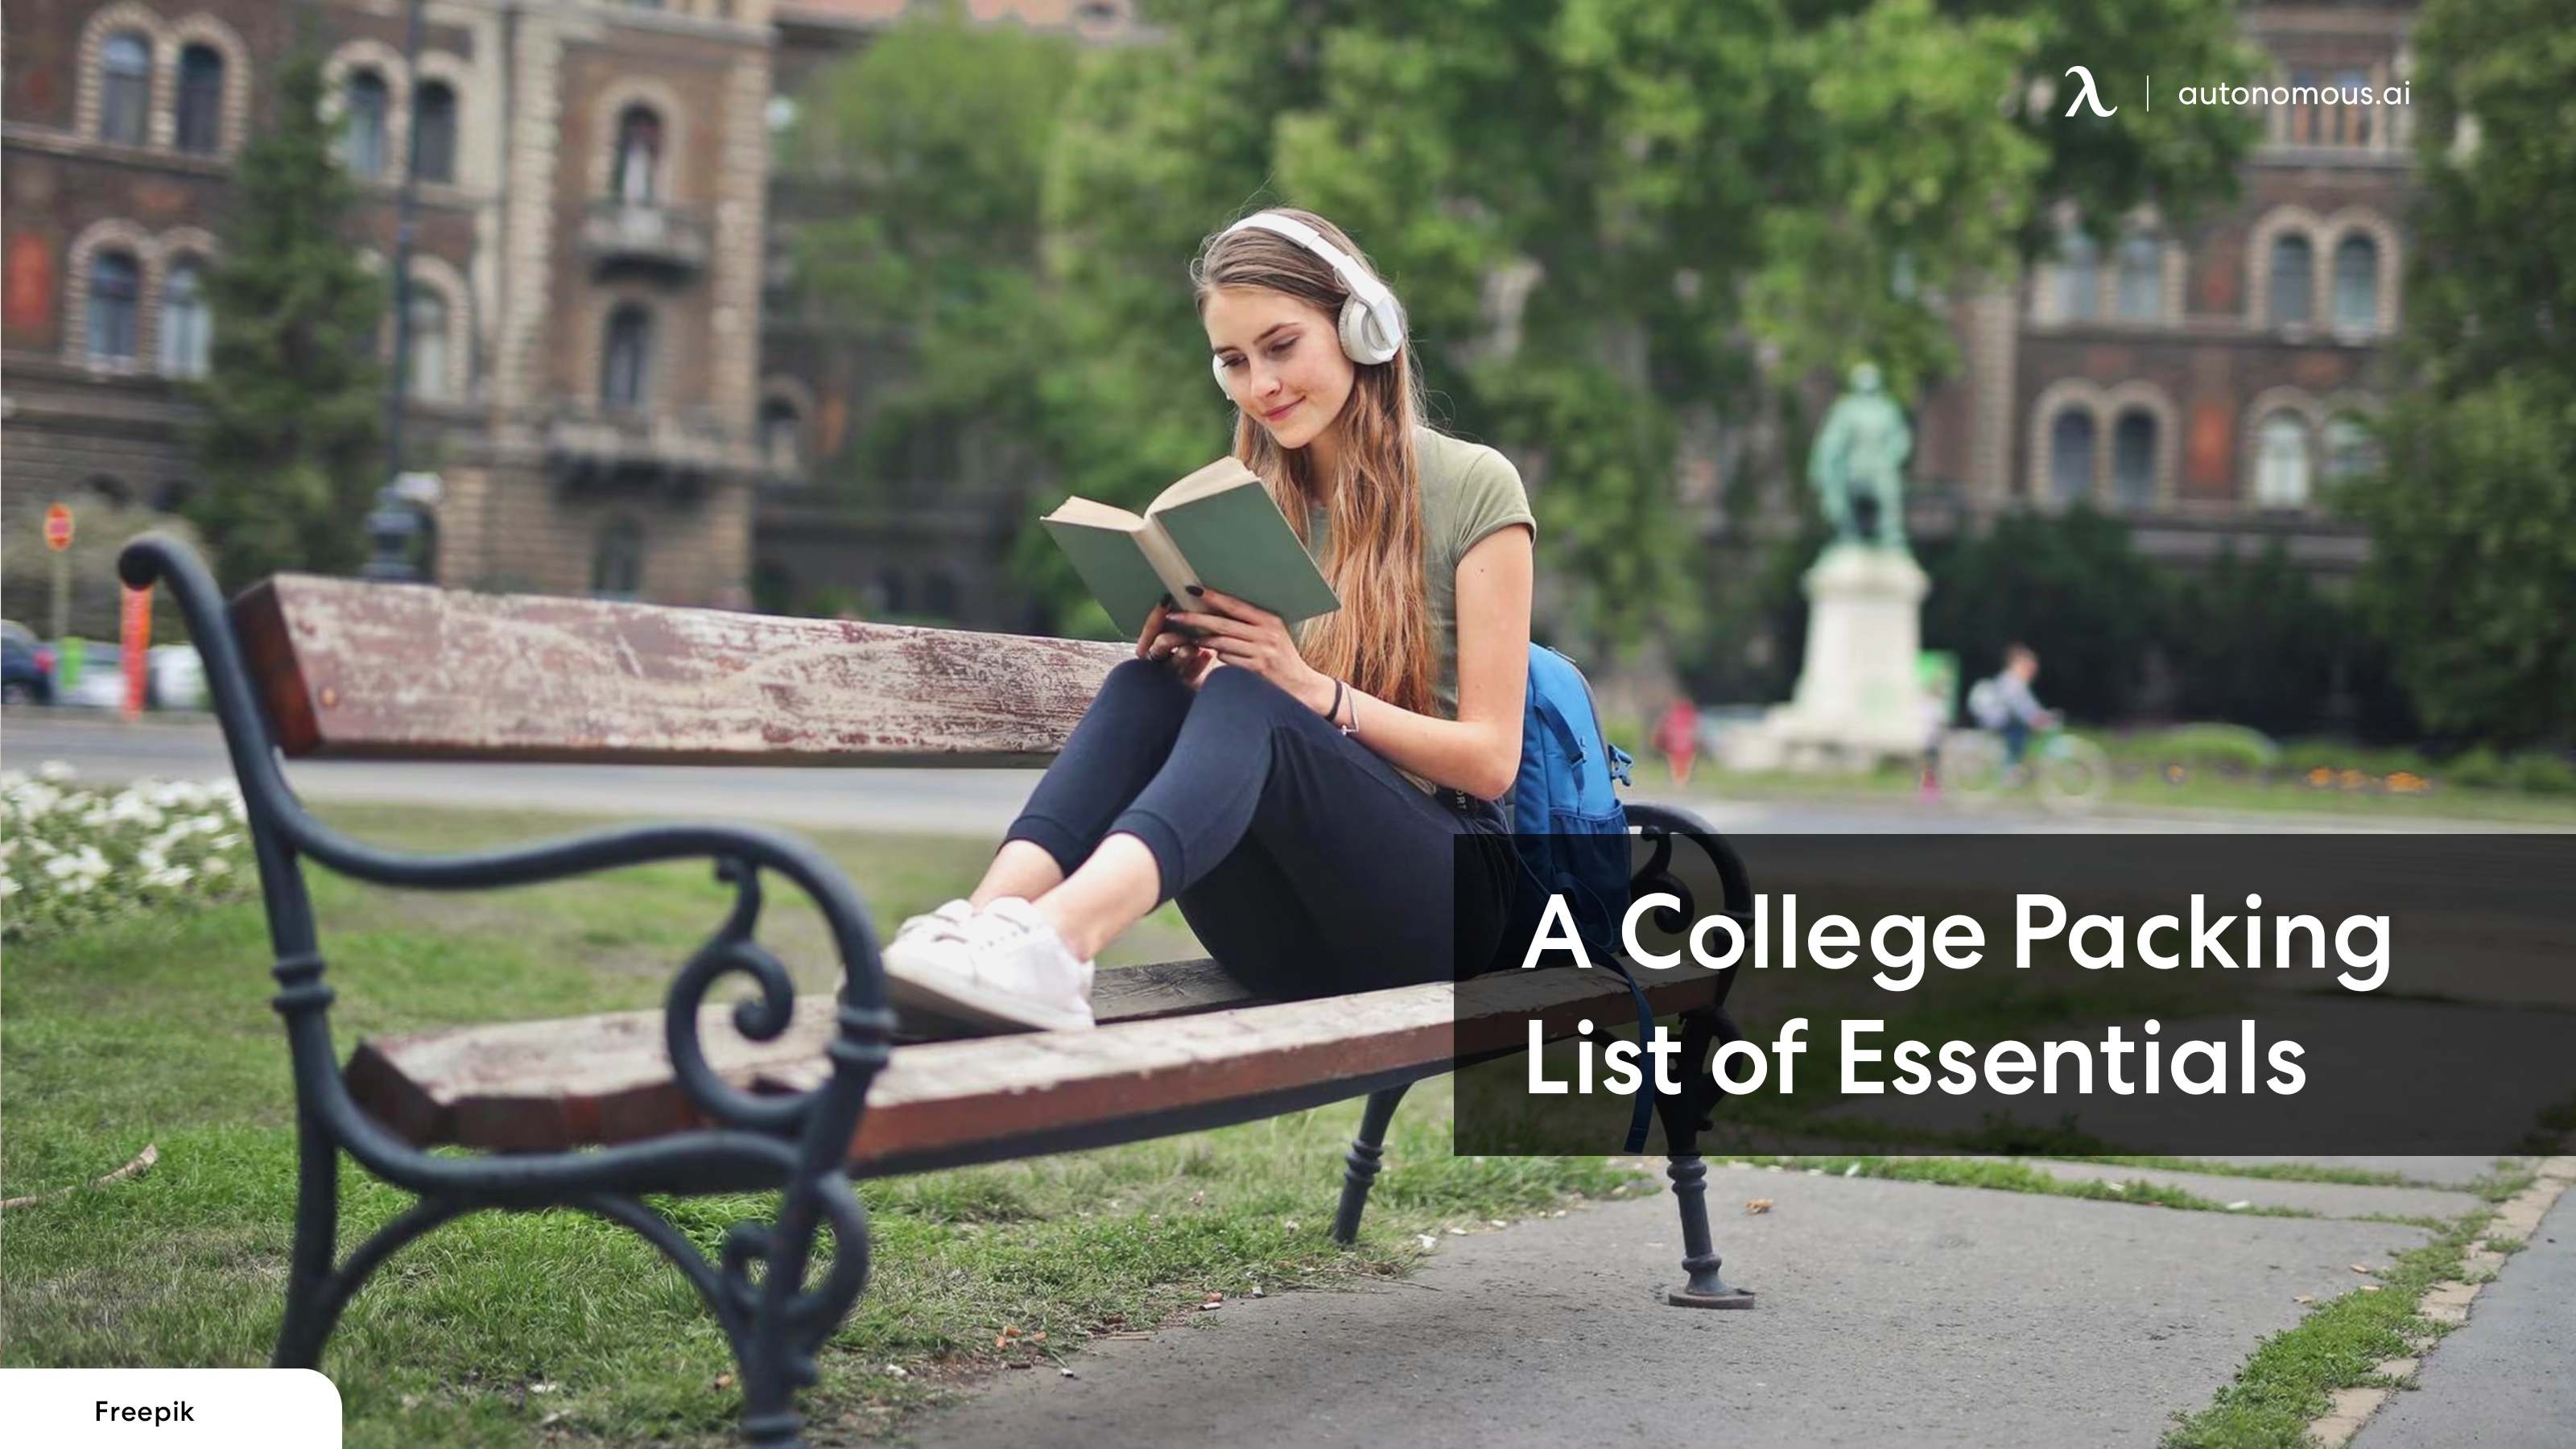 College Checklist: 20 Things You Absolutely Must Bring to Campus